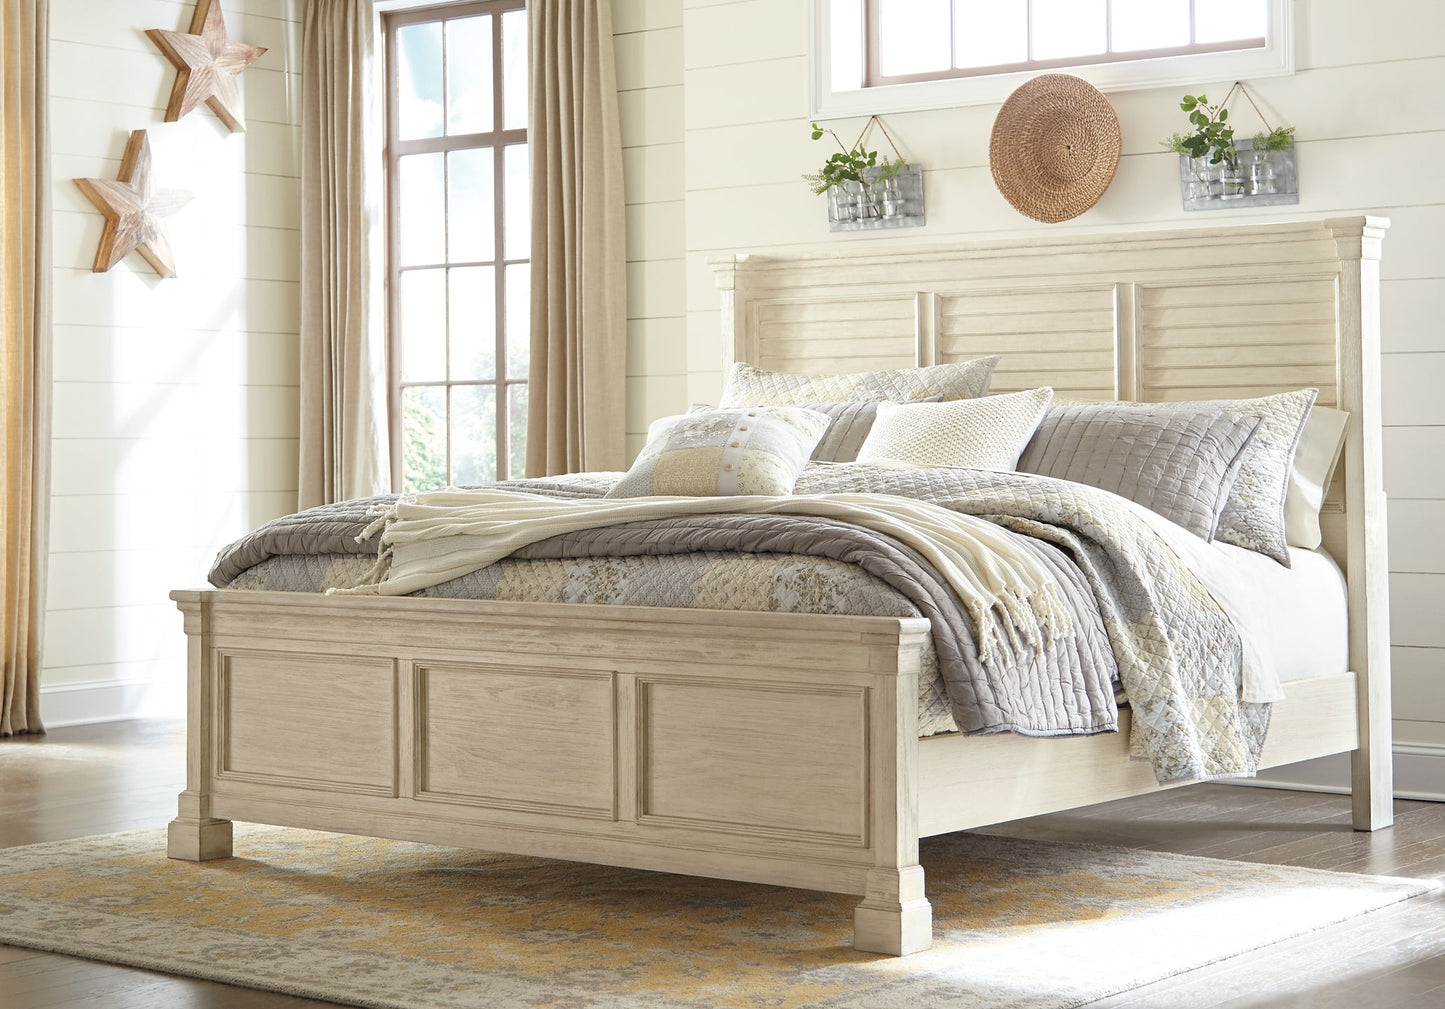 Bolanburg California King Panel Bed with Dresser at Walker Mattress and Furniture Locations in Cedar Park and Belton TX.